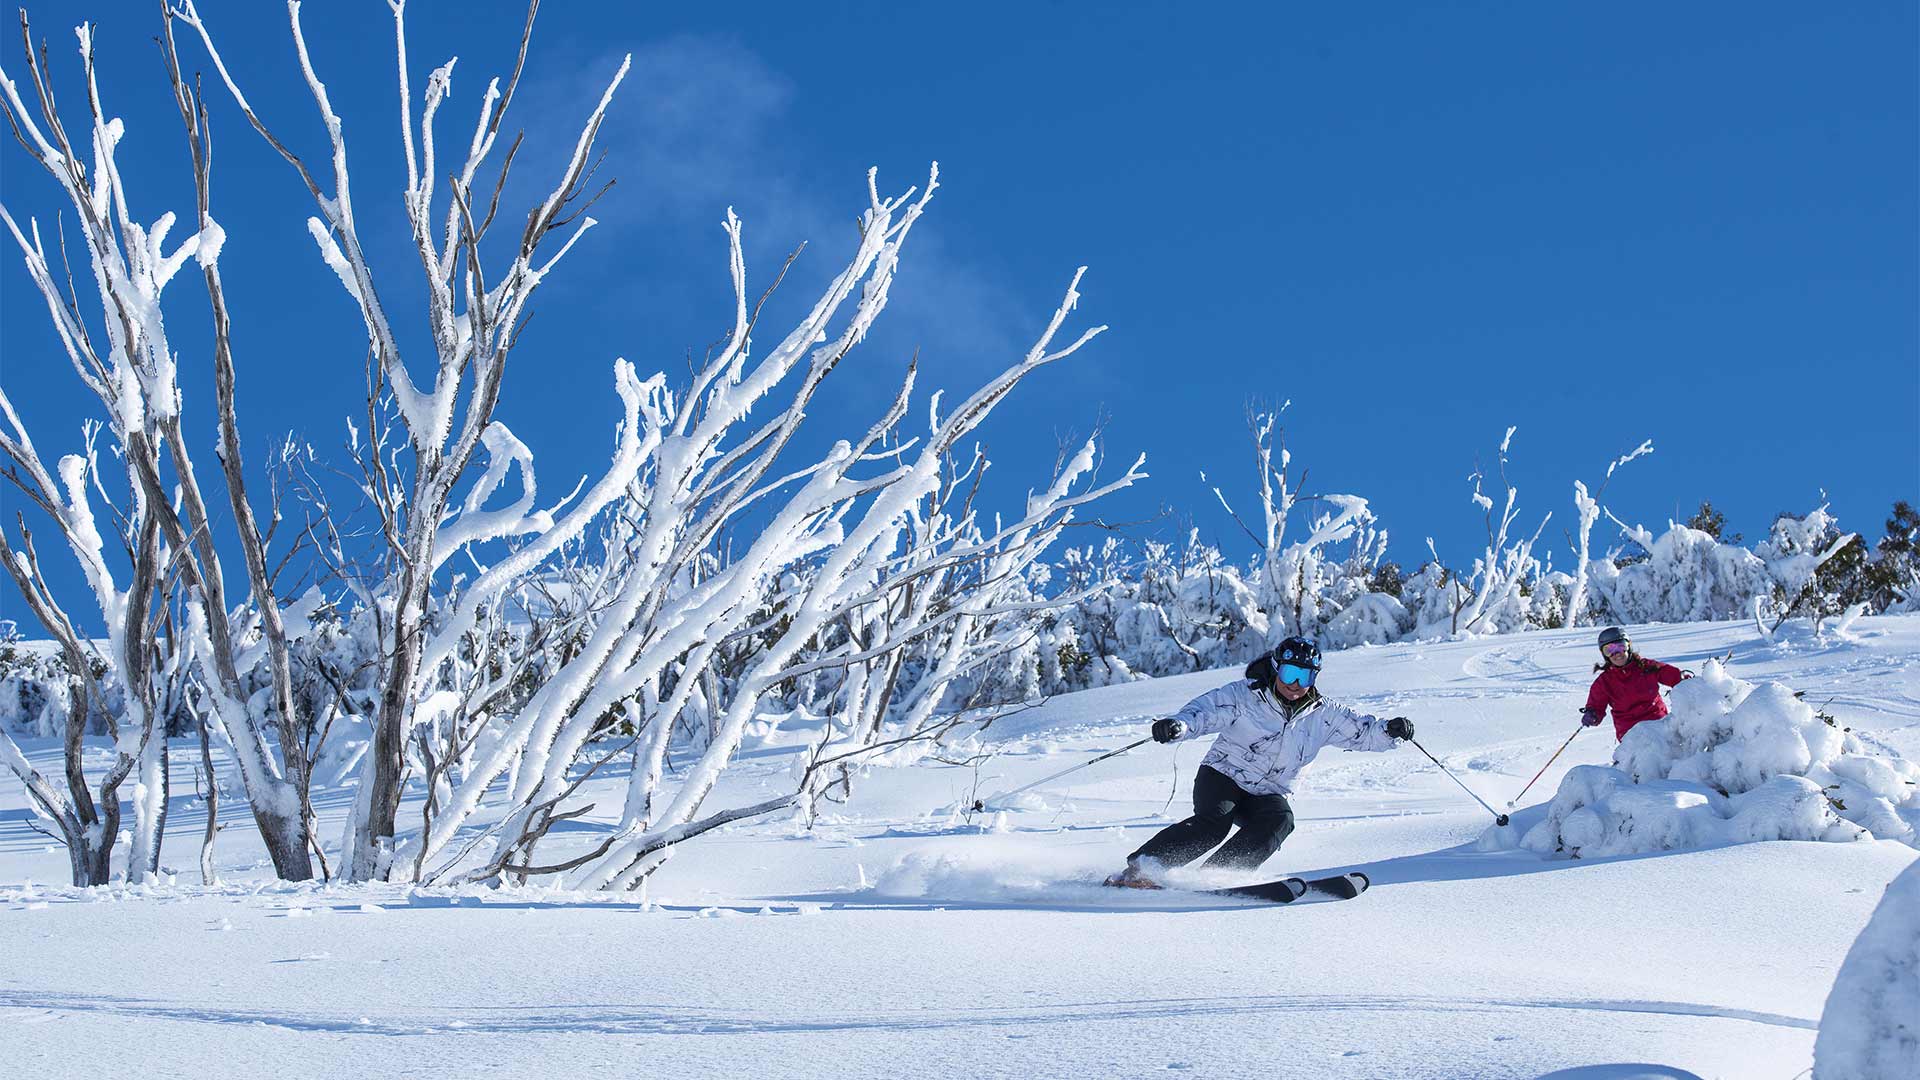 Two of Victoria's Major Snow Resorts Have Closed Again — Just Weeks After Reopening